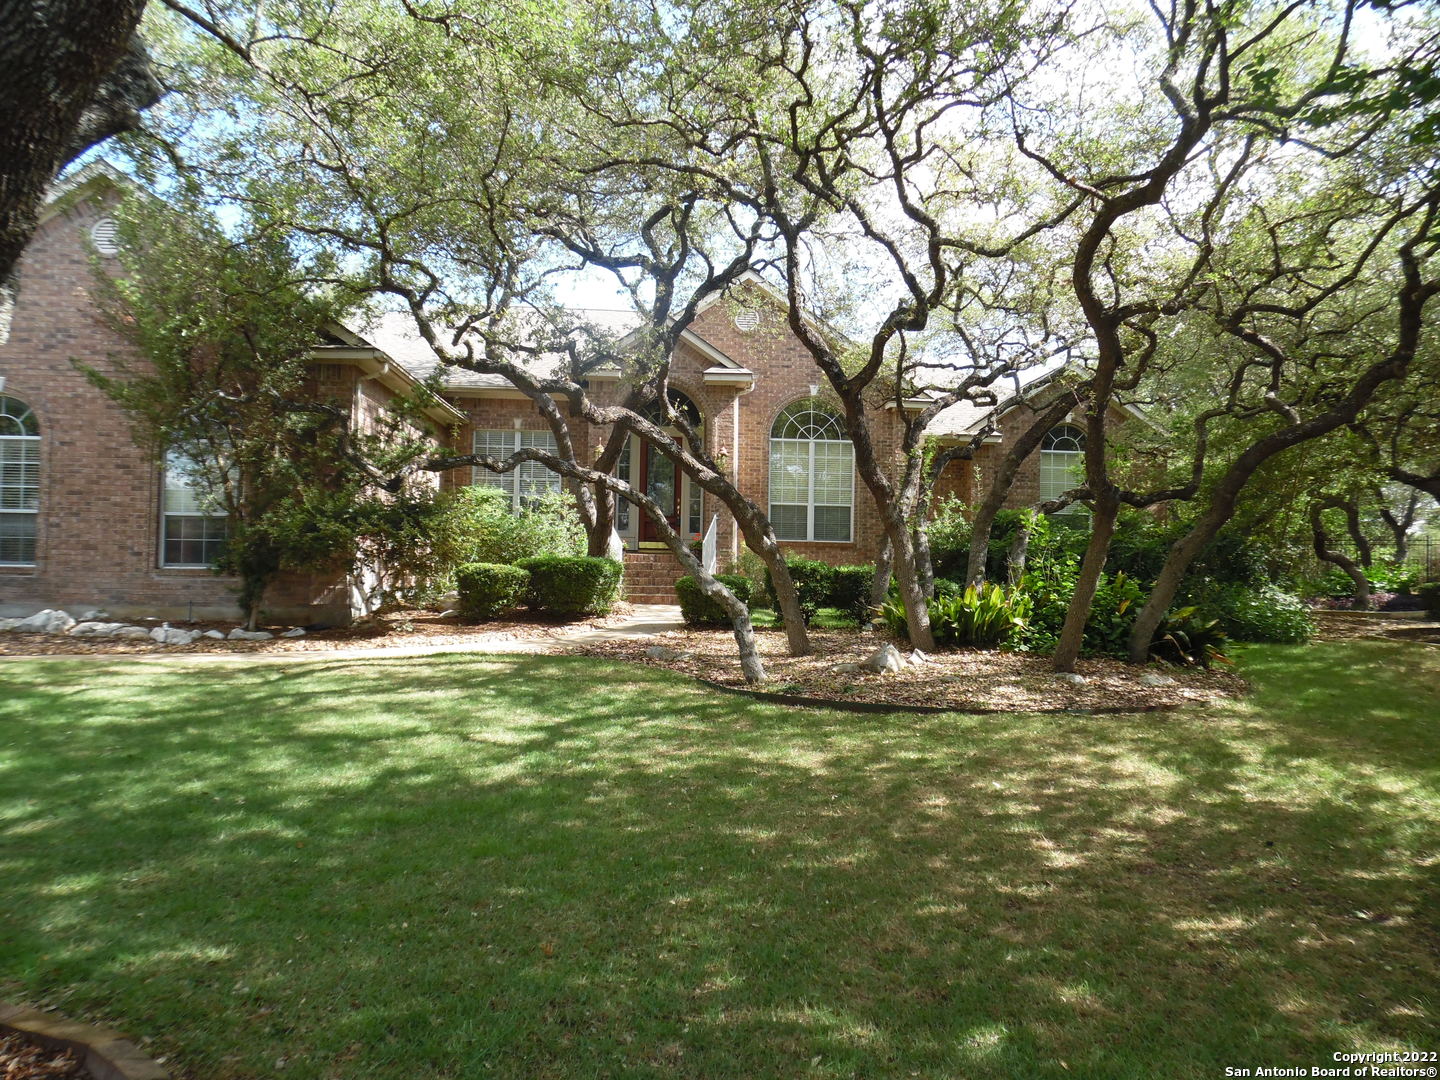 Home is in sought after Legend Oaks neighborhood!!! Fabulous new kitchen!! Beautiful new granite, sink, faucet and glass cooktop. Plus, looking for land-1 acre, 3 car garage, pool & hot tub, lots of storage and NEISD, YOU found it!!!Great backyard for entertaining, with a pergola and covered patio. 2nd bathroom has easy access to backyard without having to go into the house.  Awesome 1 story home!! Located close to schools, shopping, dining and major highways-281 & 1604. Please excuse any boxes, in the process of packing.